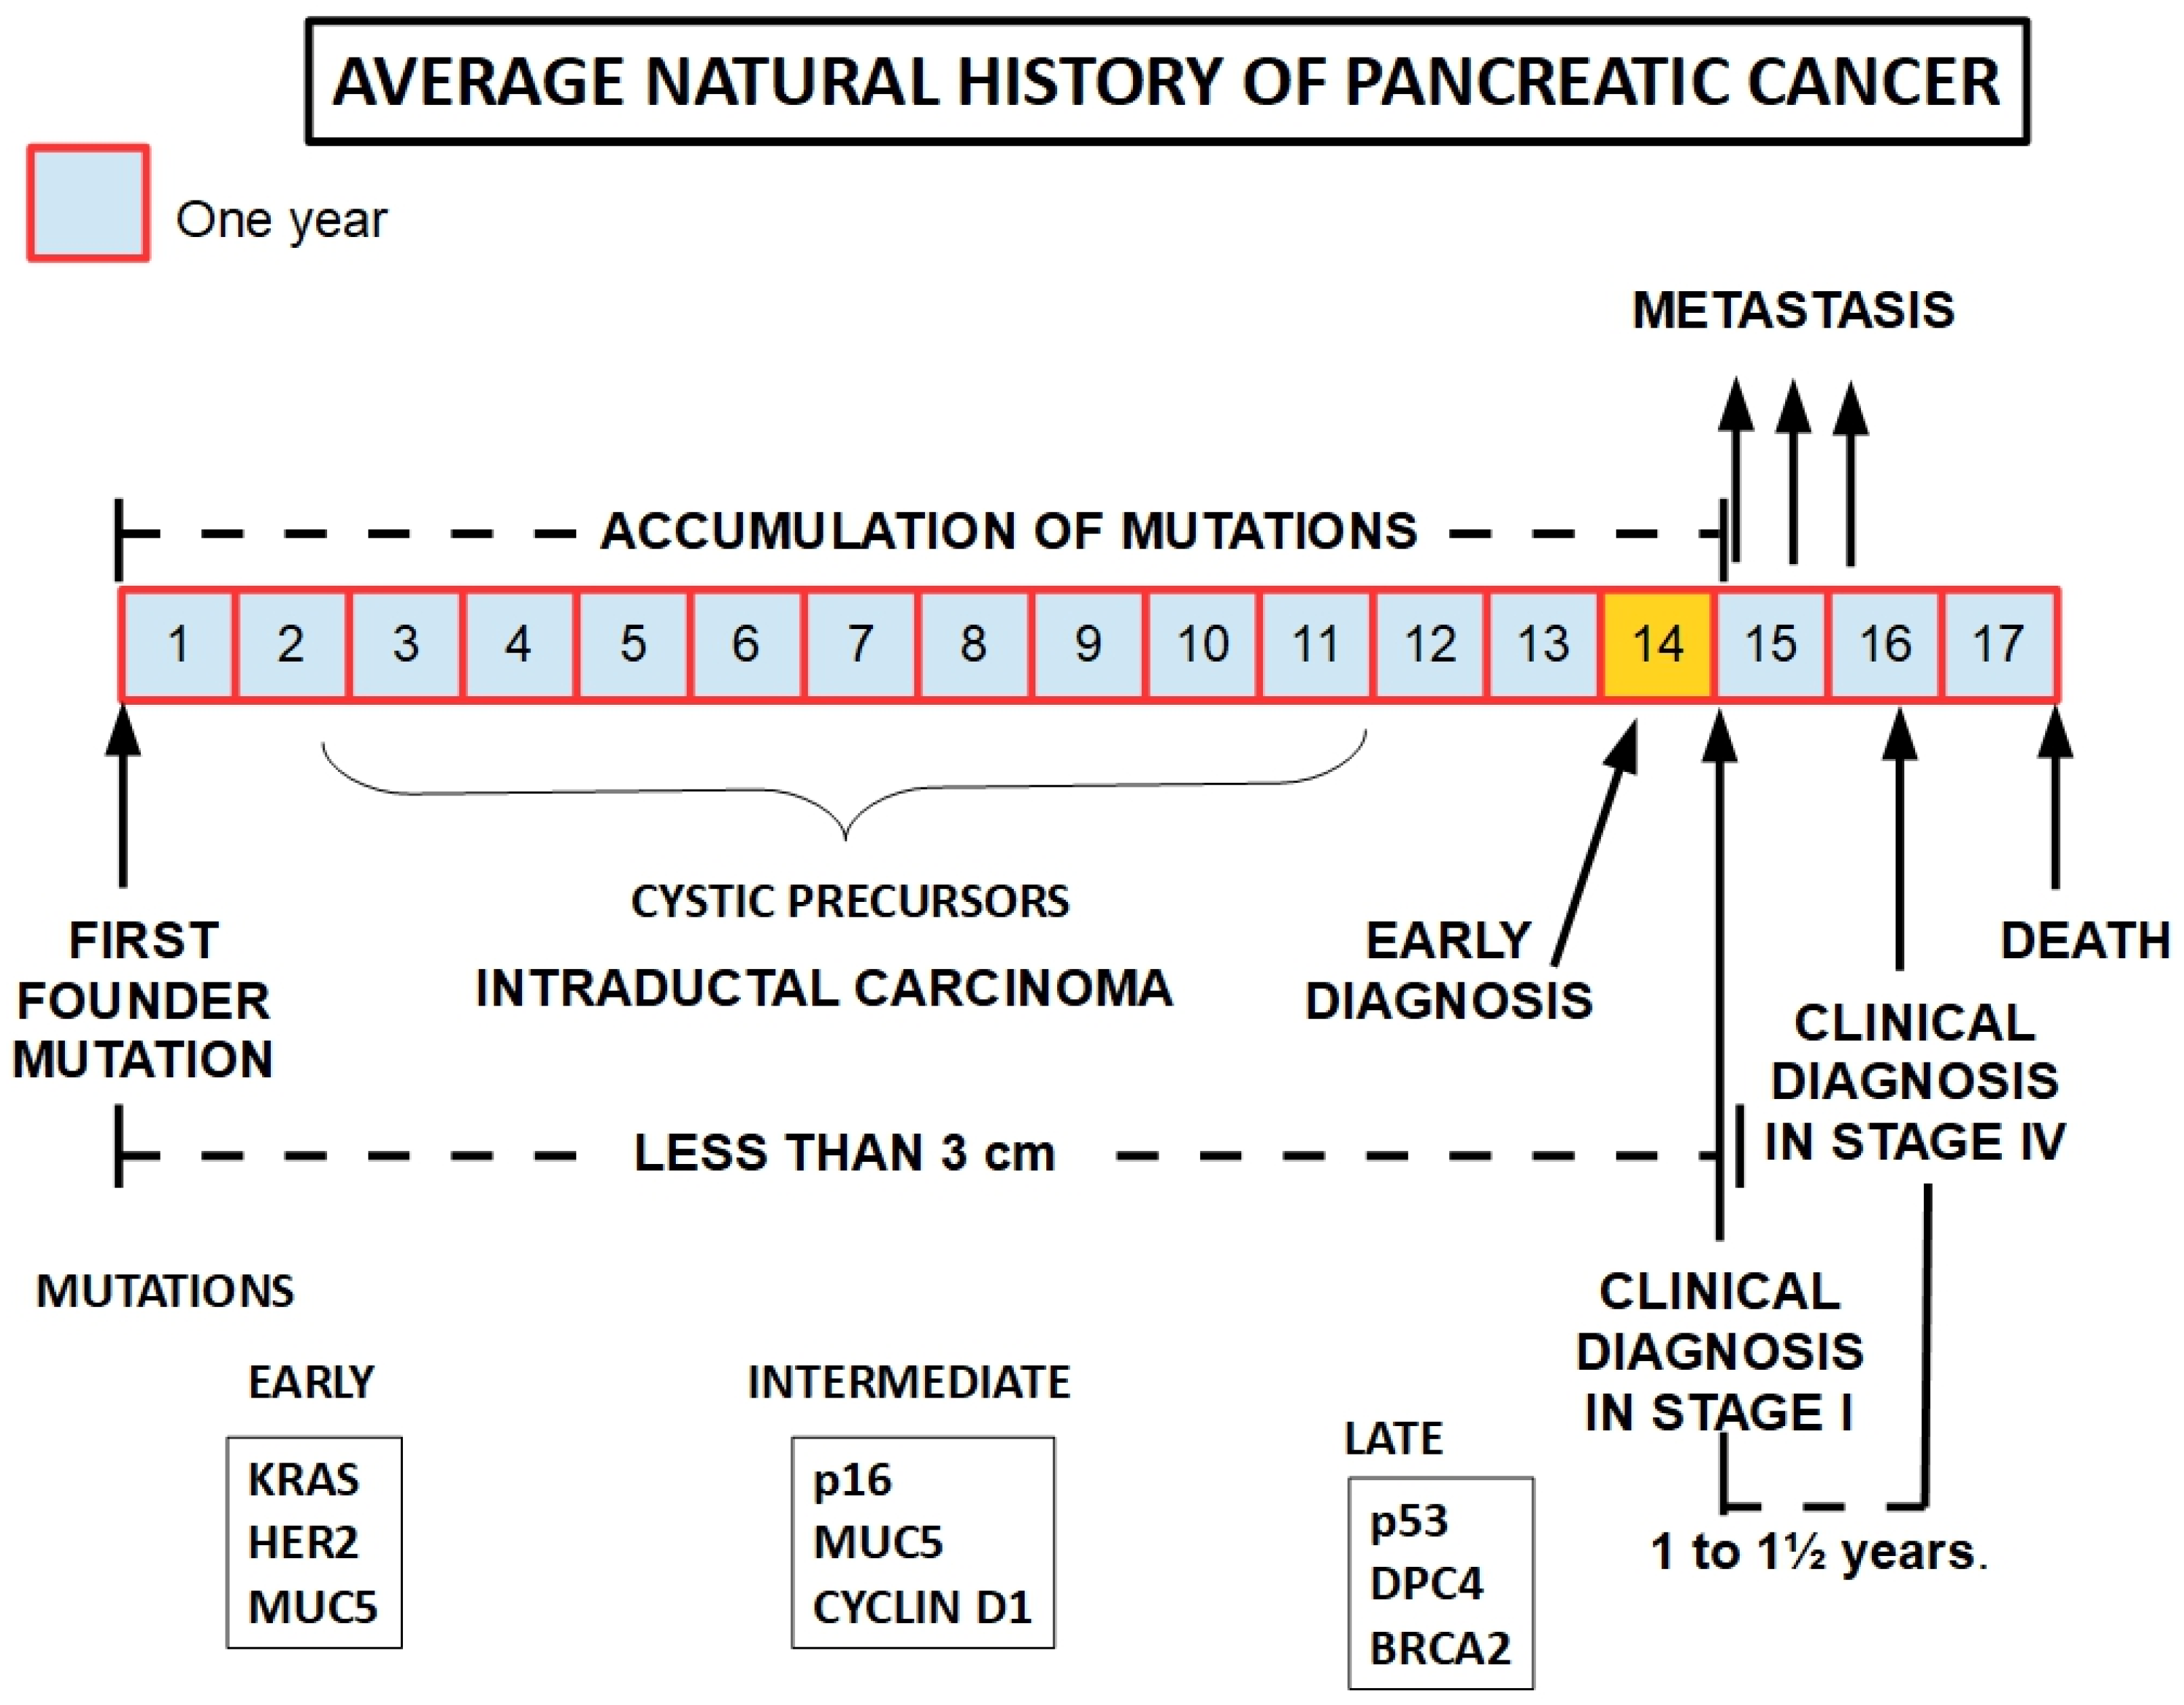 Timeline of pancreatic cancer subtyping. The timeline of pancreatic